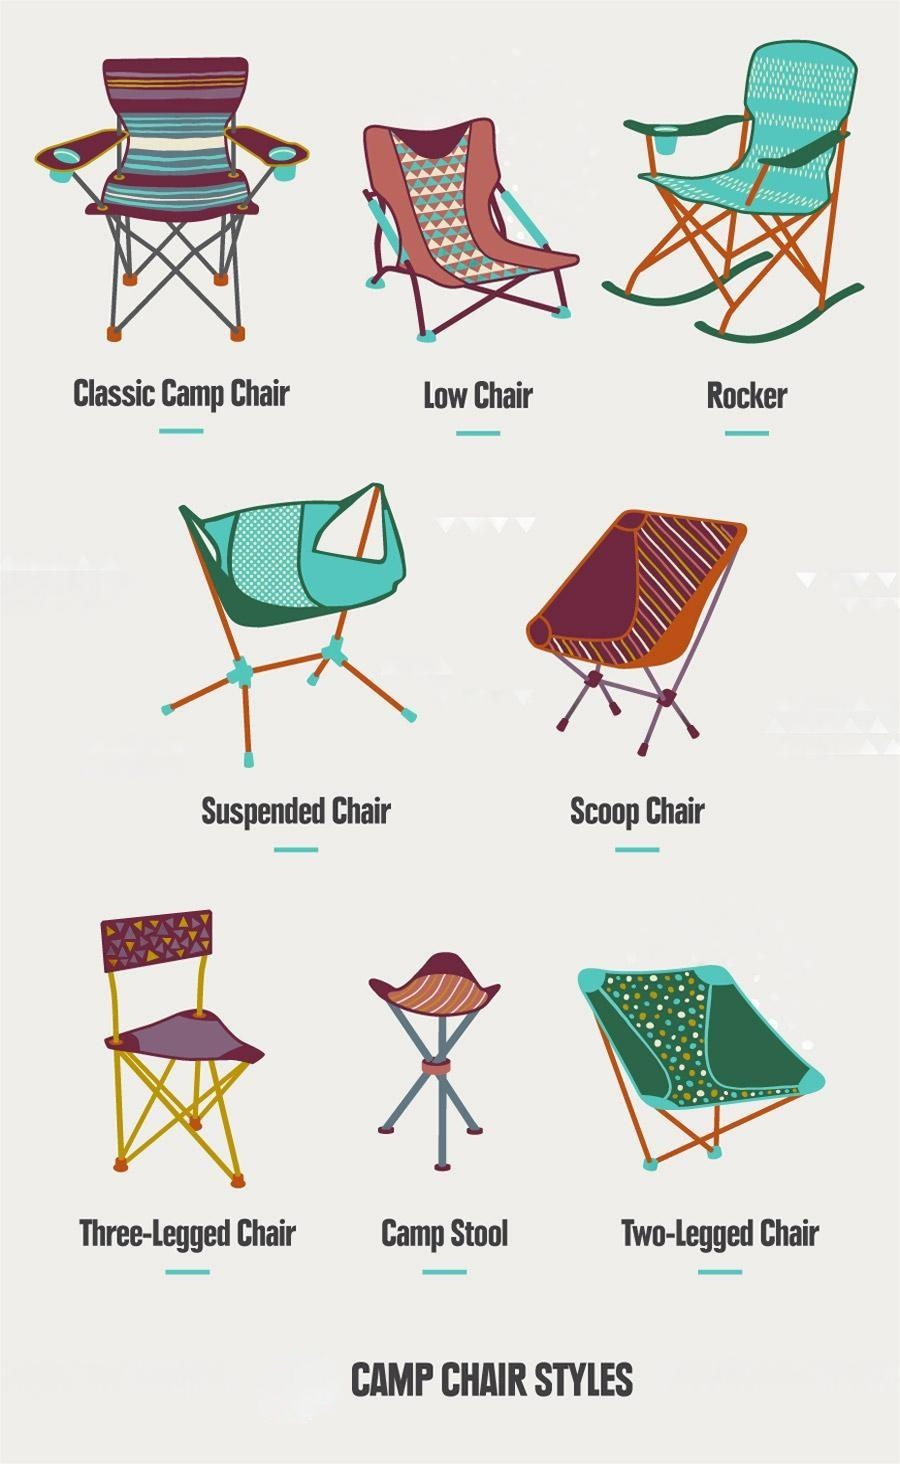 Considerations of choosing a outdoor camping chair?